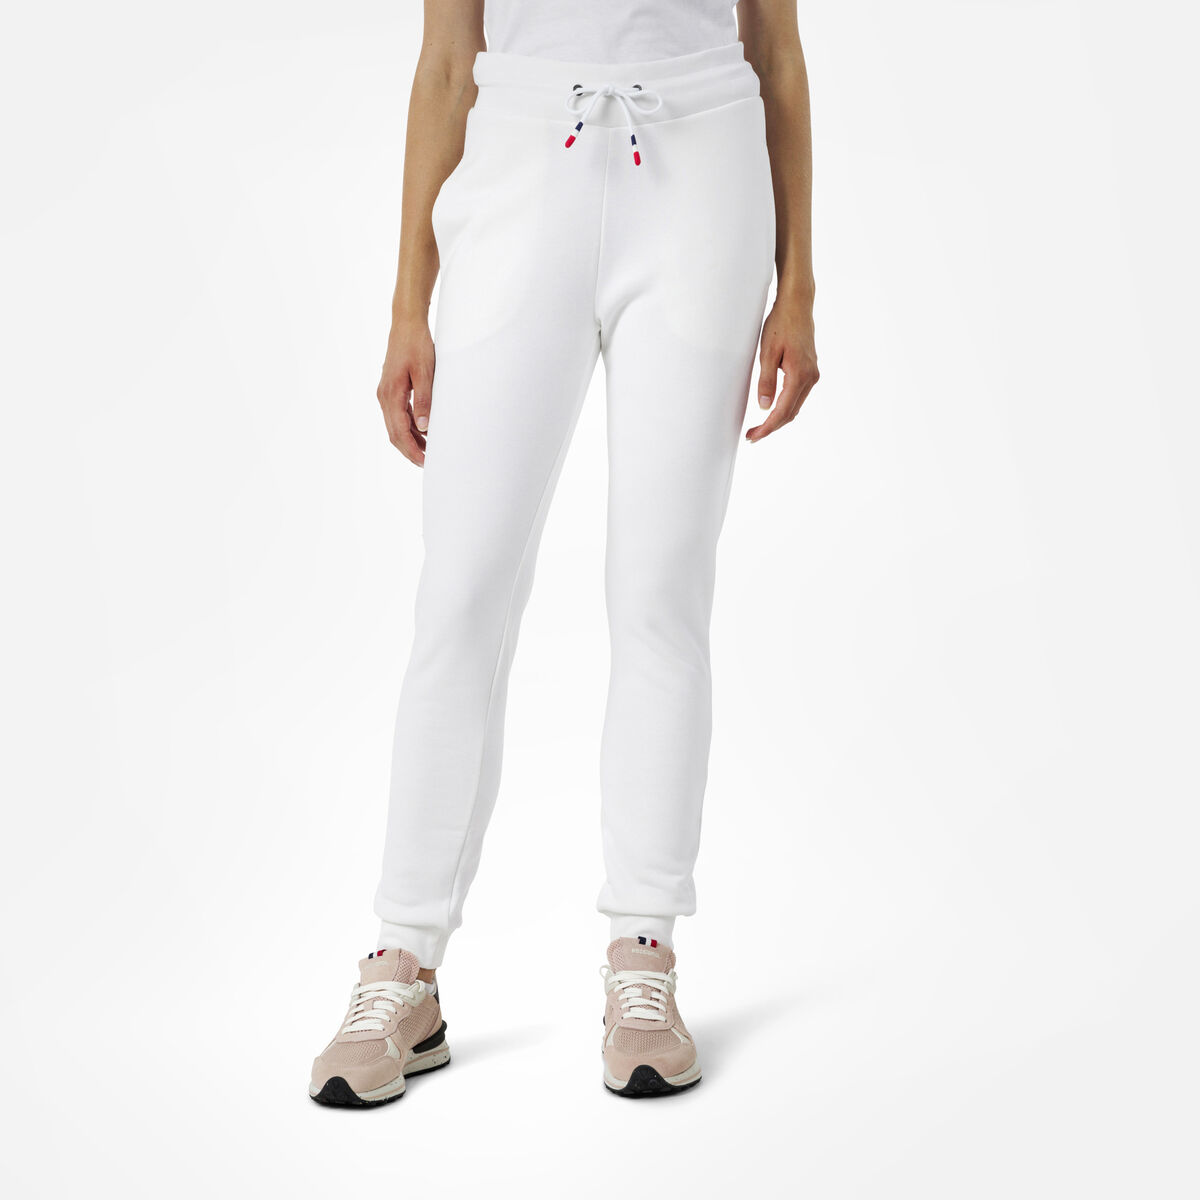 ROSSIGNOL, White Women's Casual Pants